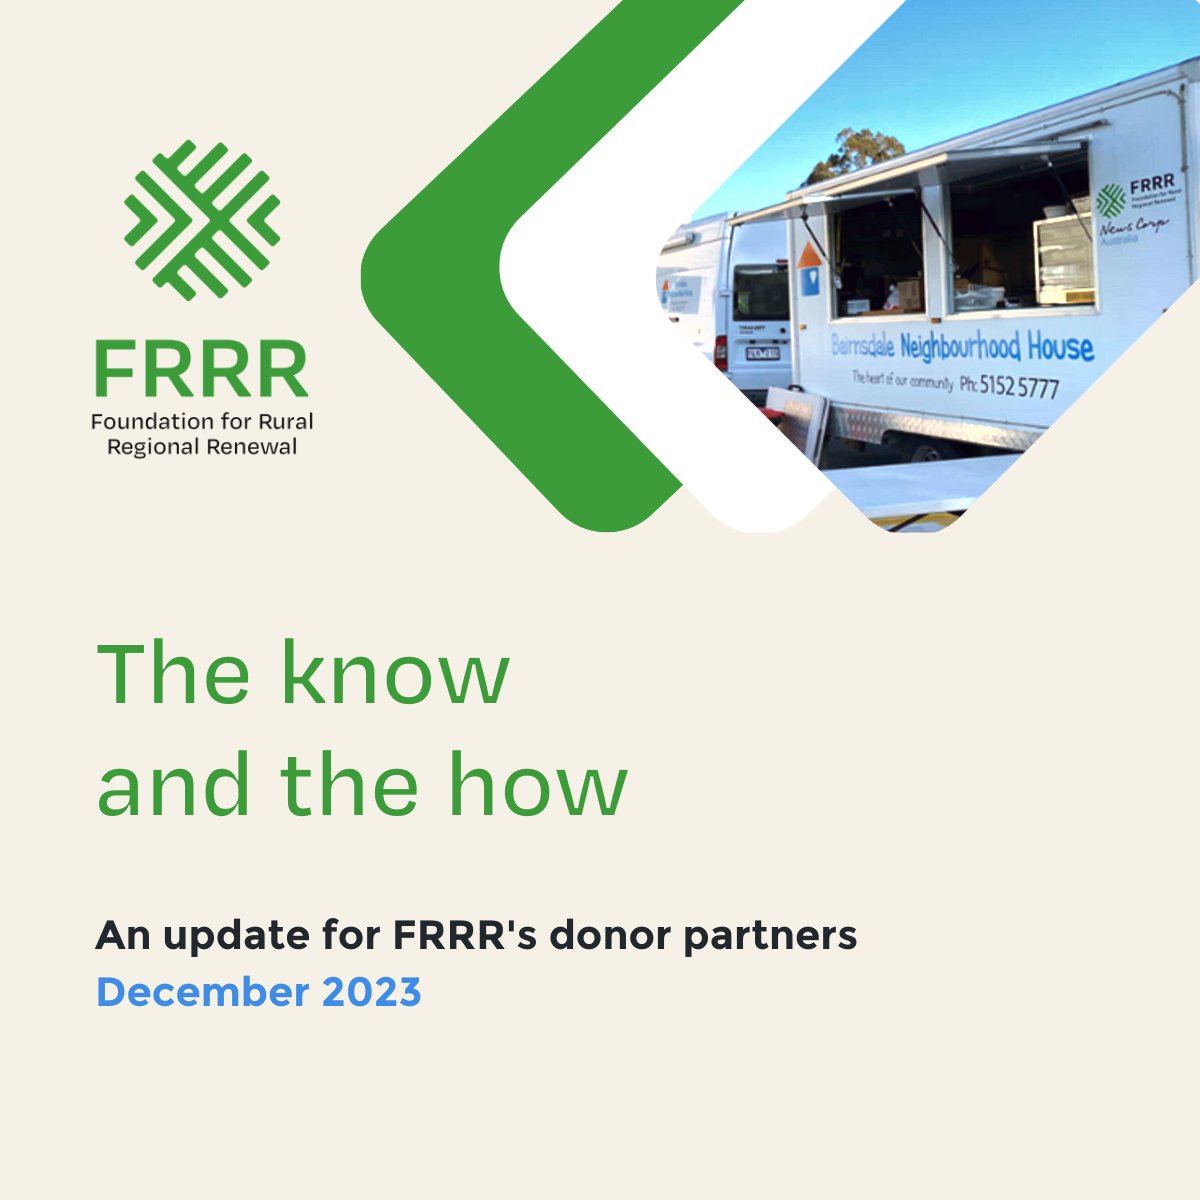 Earlier today, we shared an update for our partners and supporters, highlighting the impact of their generosity, as well as passing on some common themes and issues we've heard about in the last few months. Read it here: ow.ly/3ZL050QiB4a #RuralAus #Philanthropy #Giving